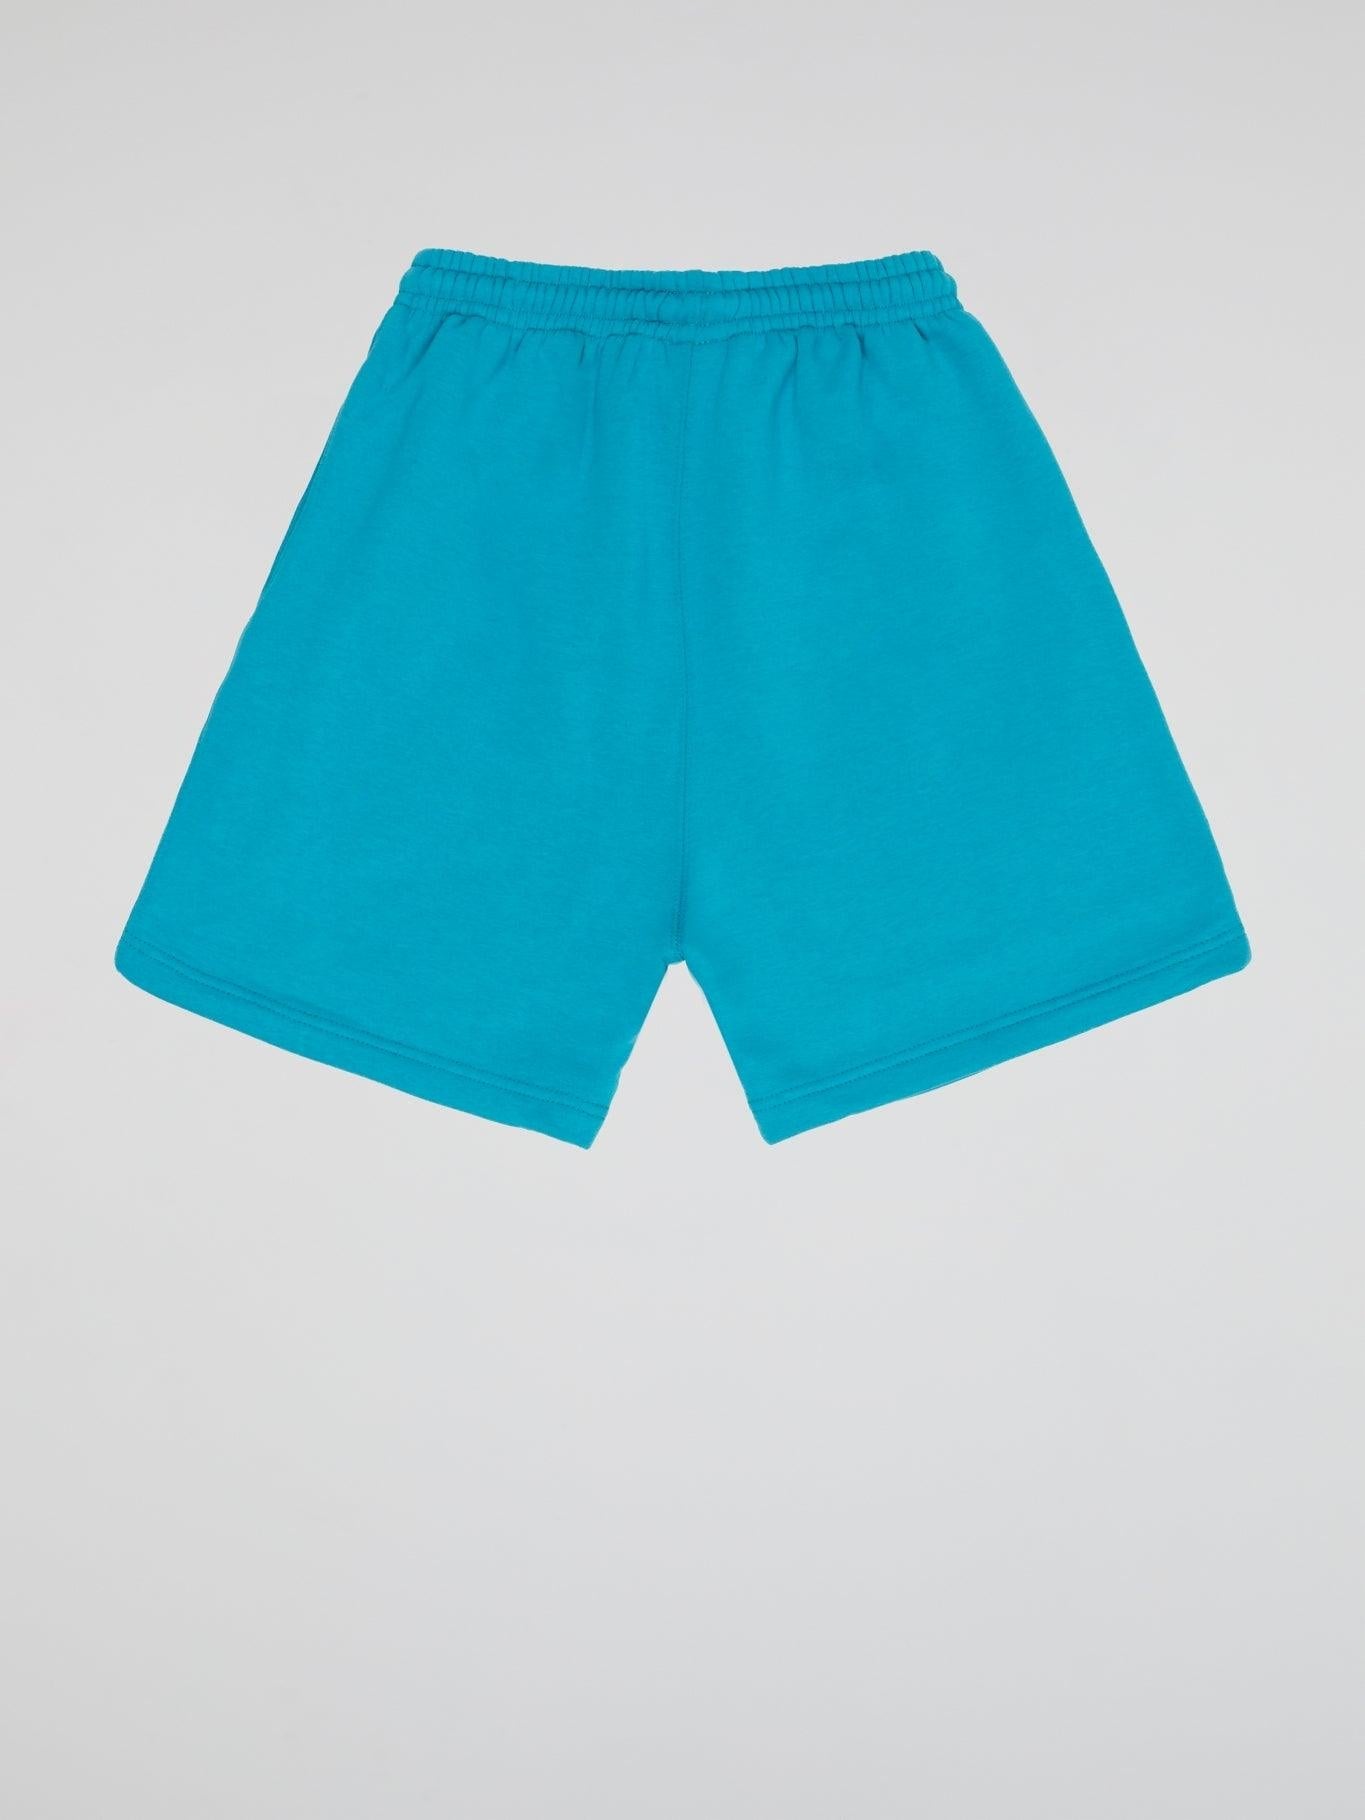 BHYPE LOGO ESSENTIALS TURQUOISE BLUE SHORTS - B-Hype Society